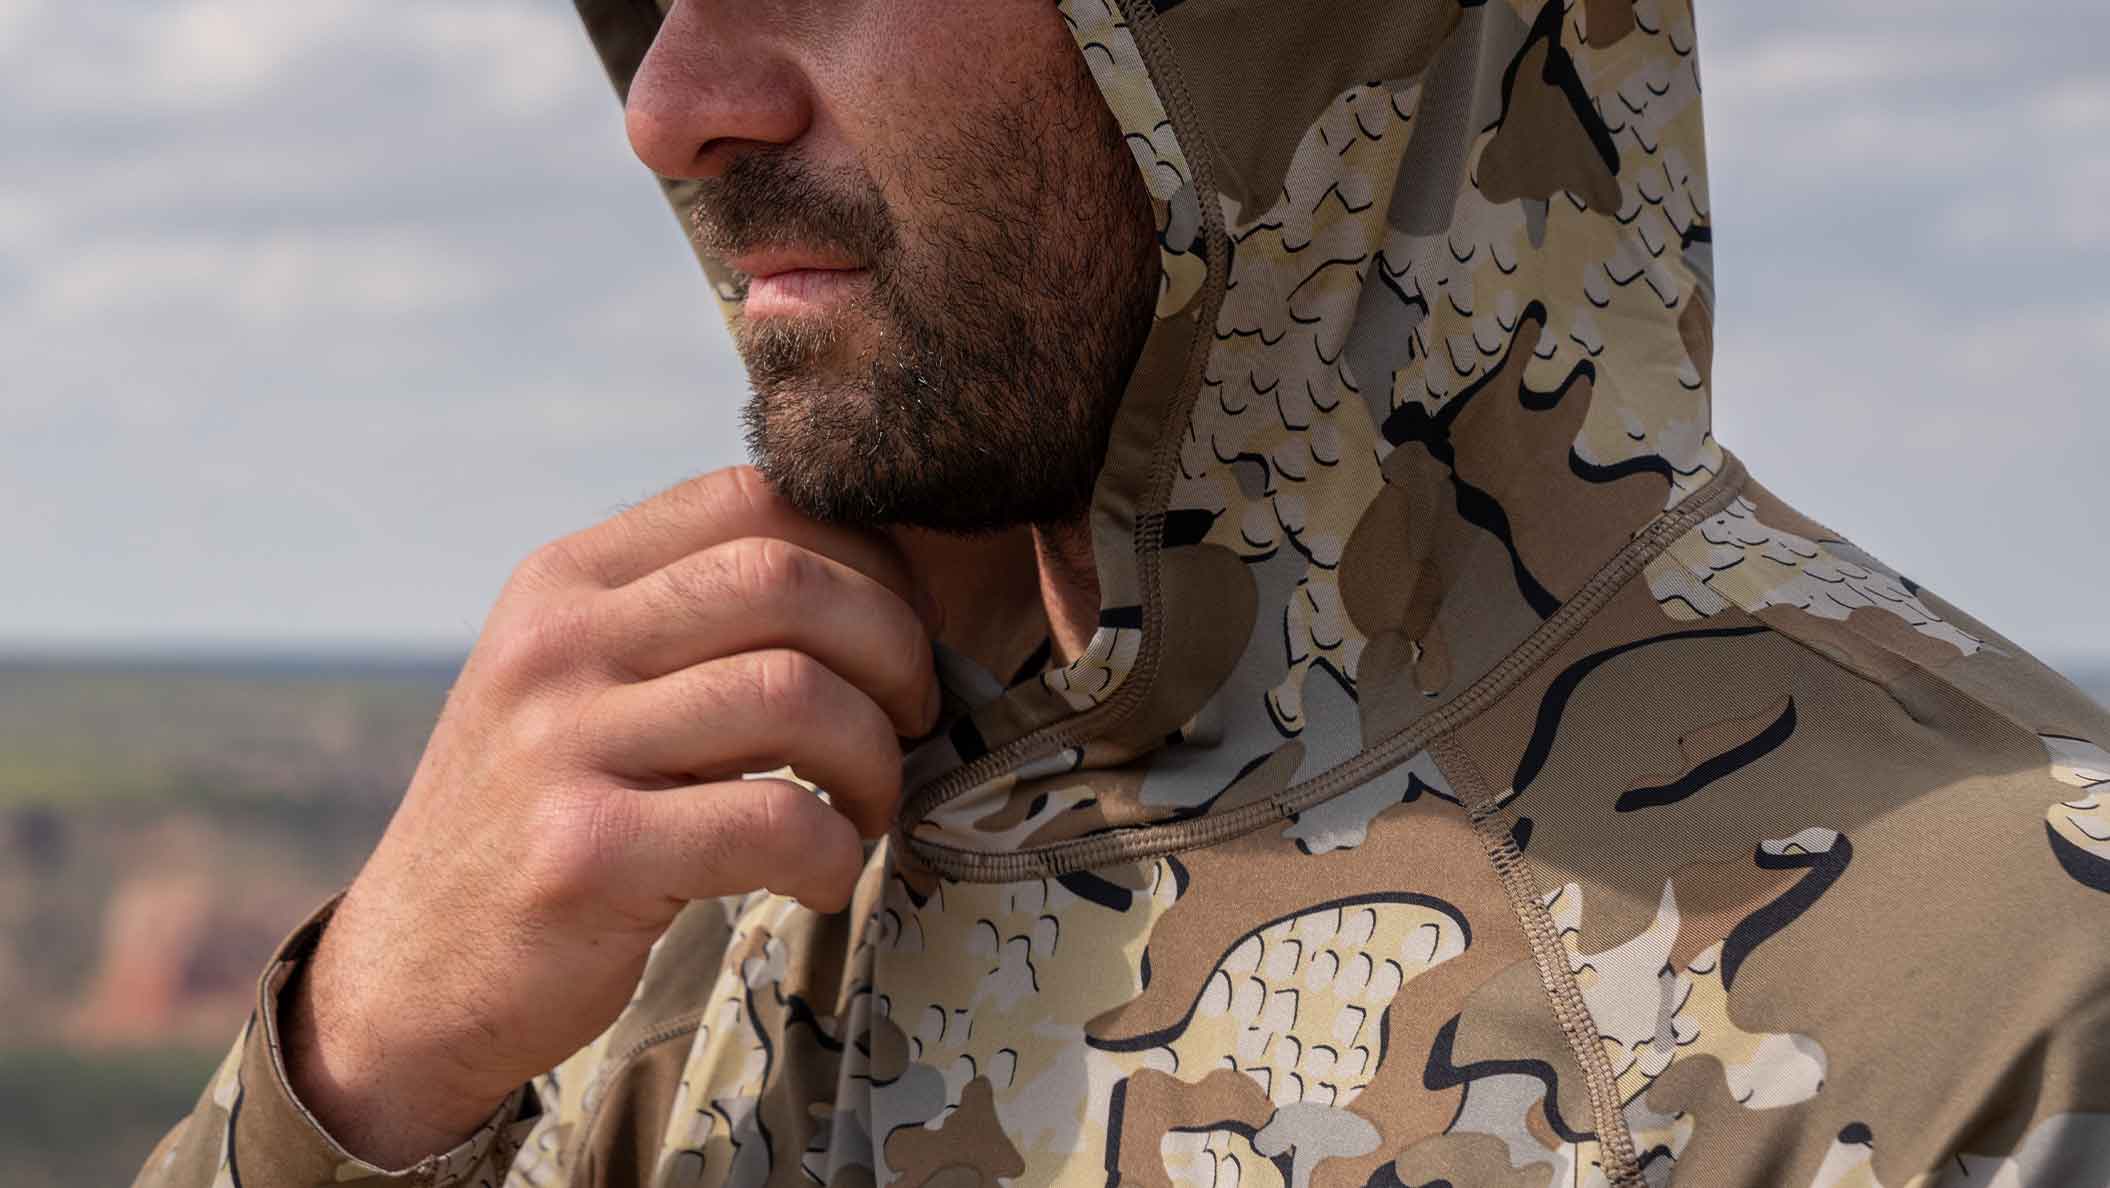 High Temps? No Problem with KUIU's Gila Line of Hot-Weather Hunting Clothes